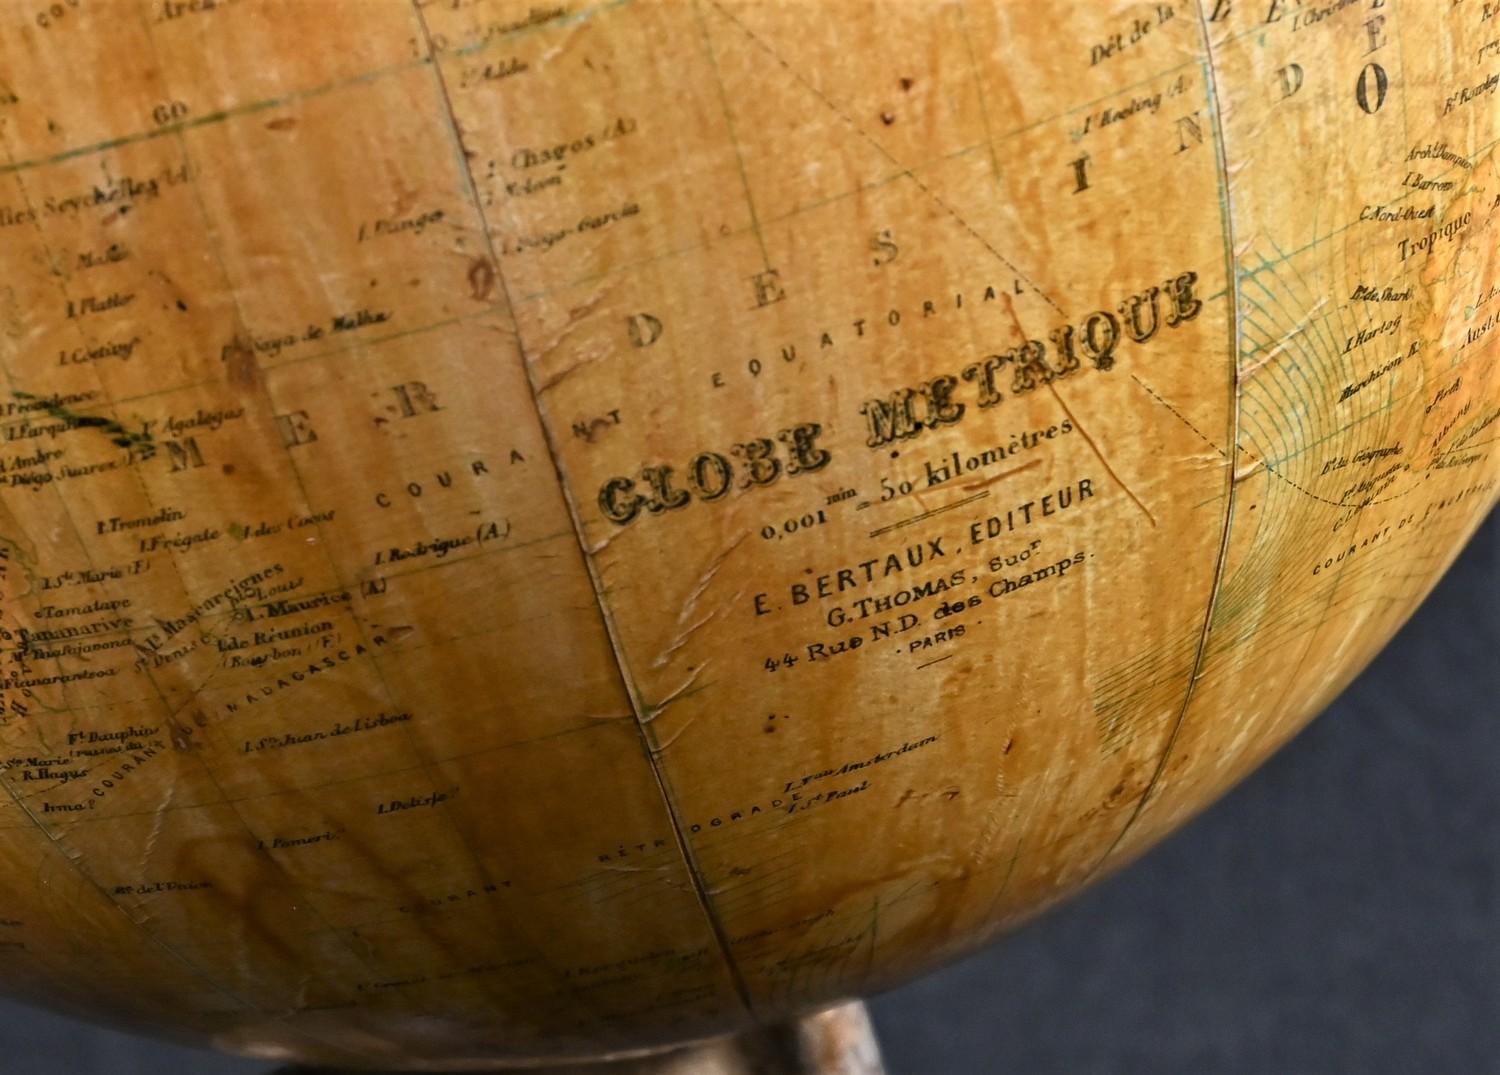 A 19th century French terrestrial globe, Globe Metrique, by Emile Bertaux, Paris, brass meridian - Image 4 of 4